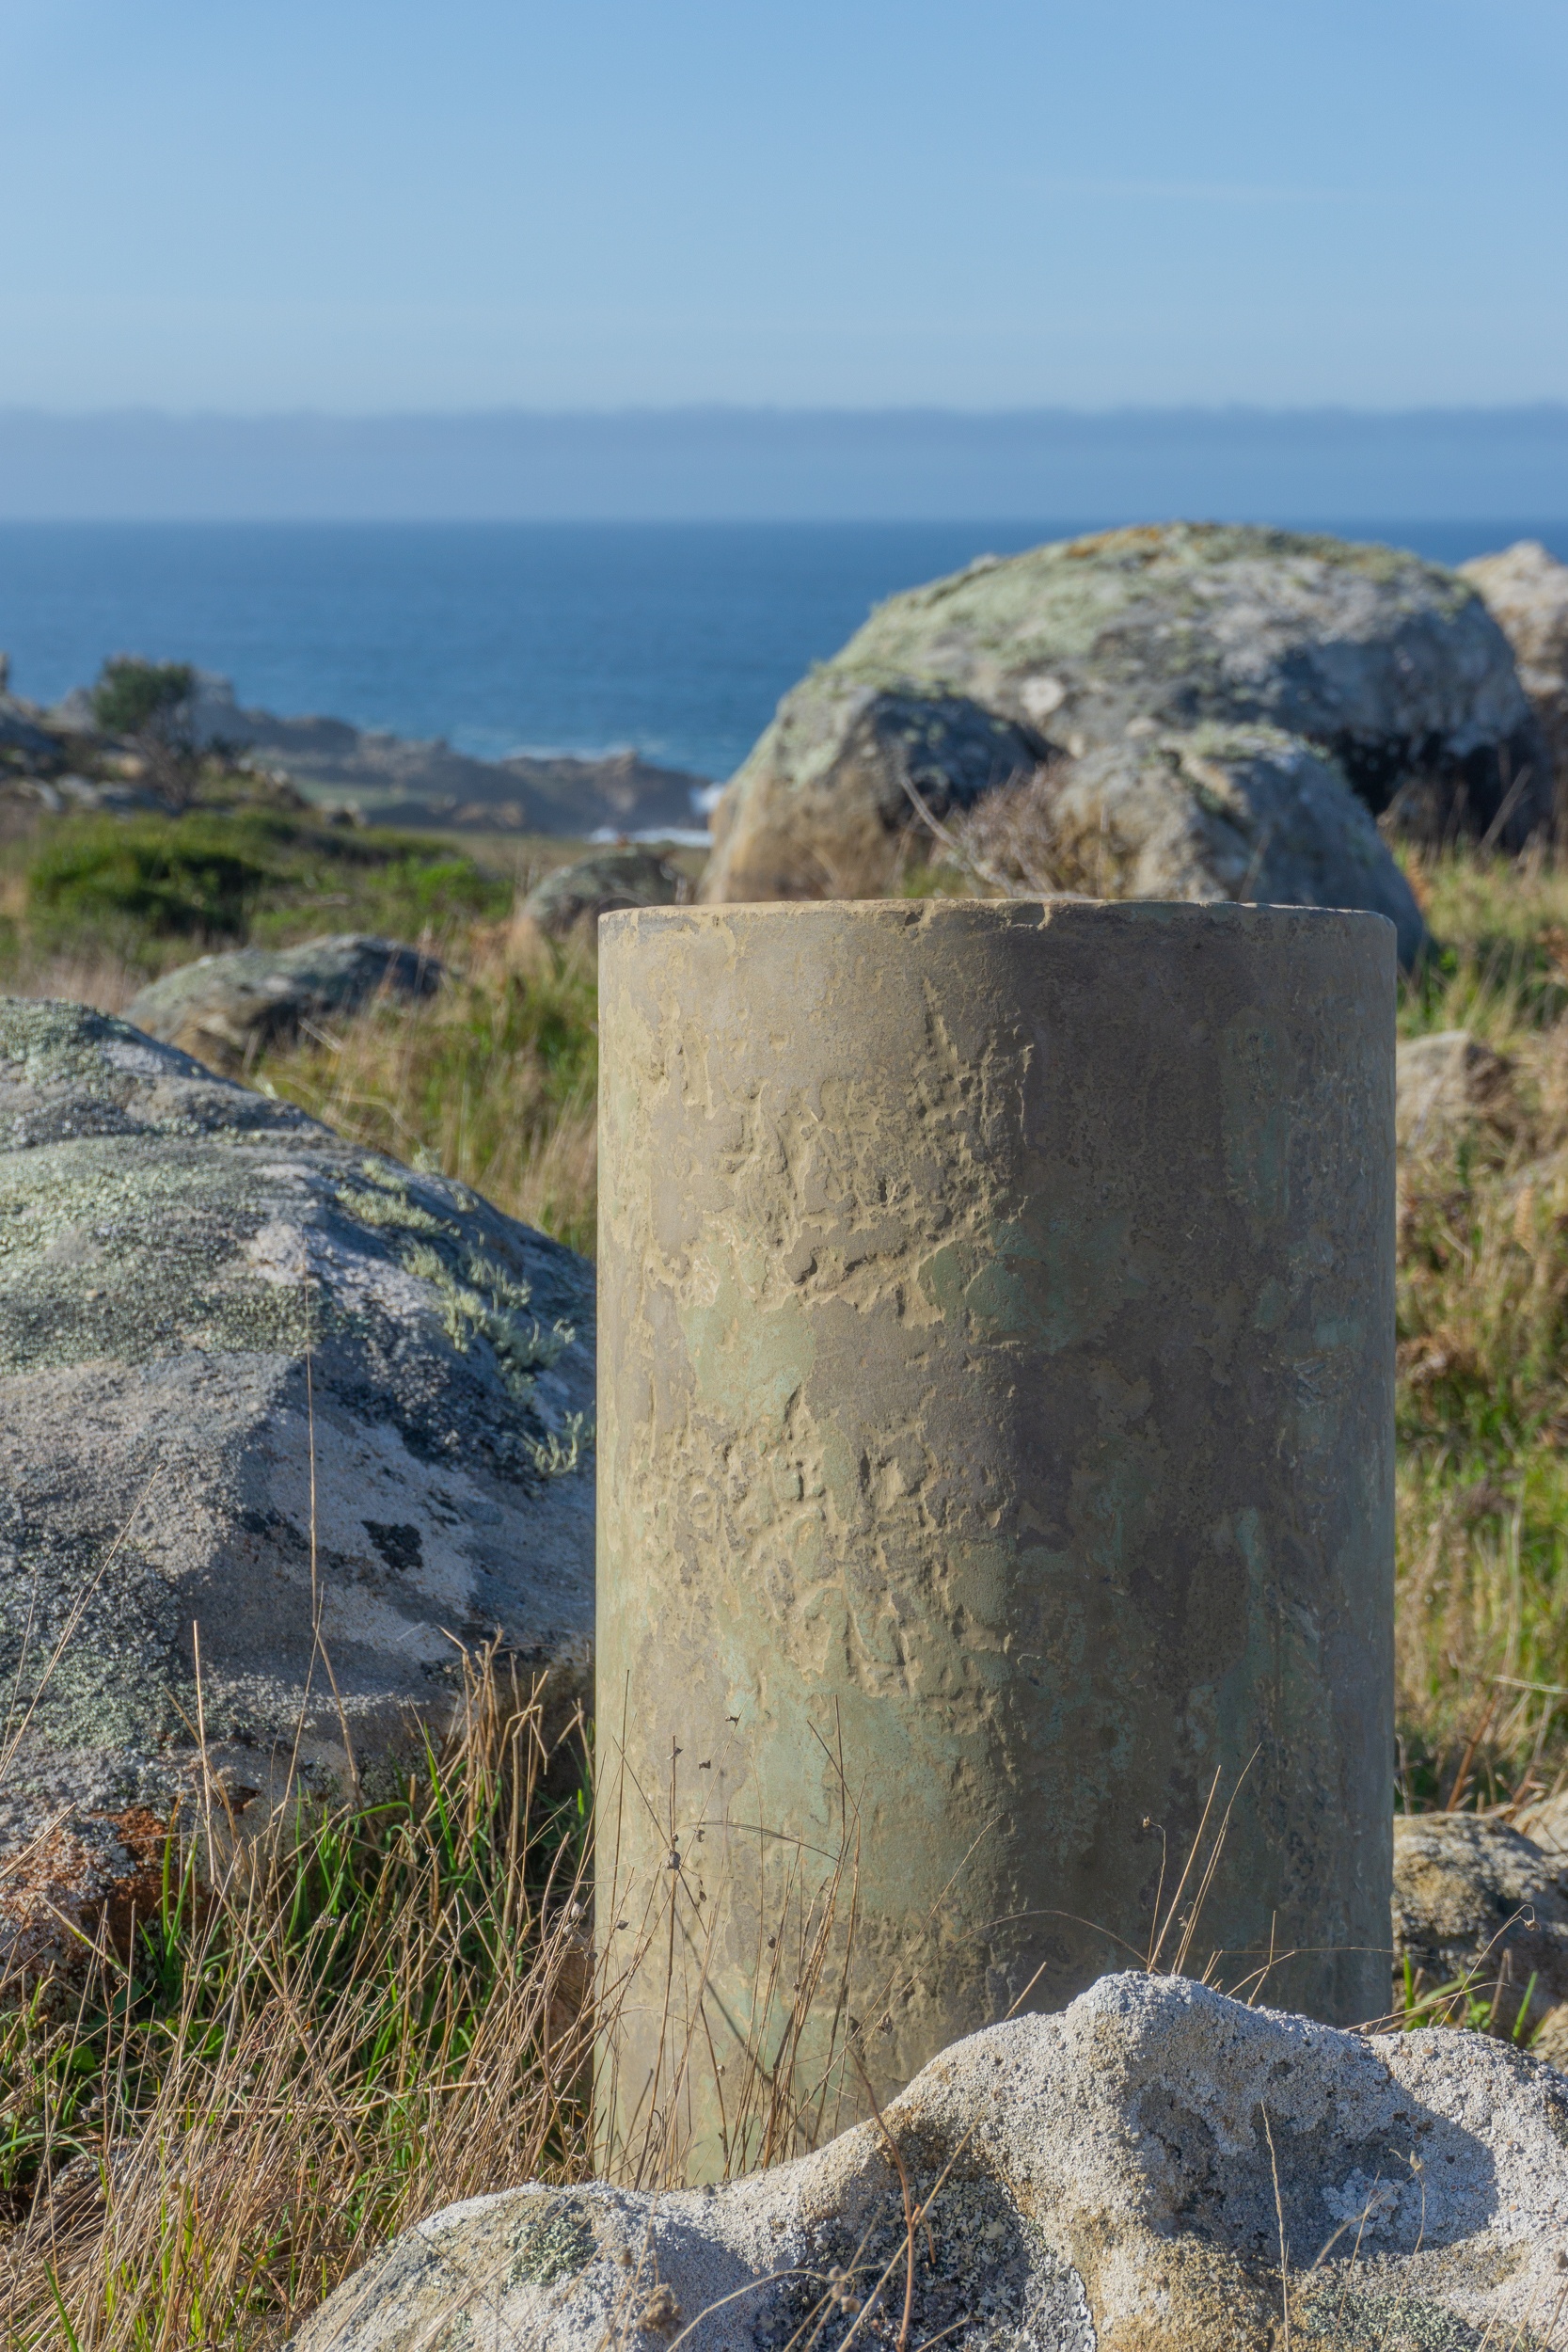 Small concrete stool in green and brown at gerstle cove bluffs